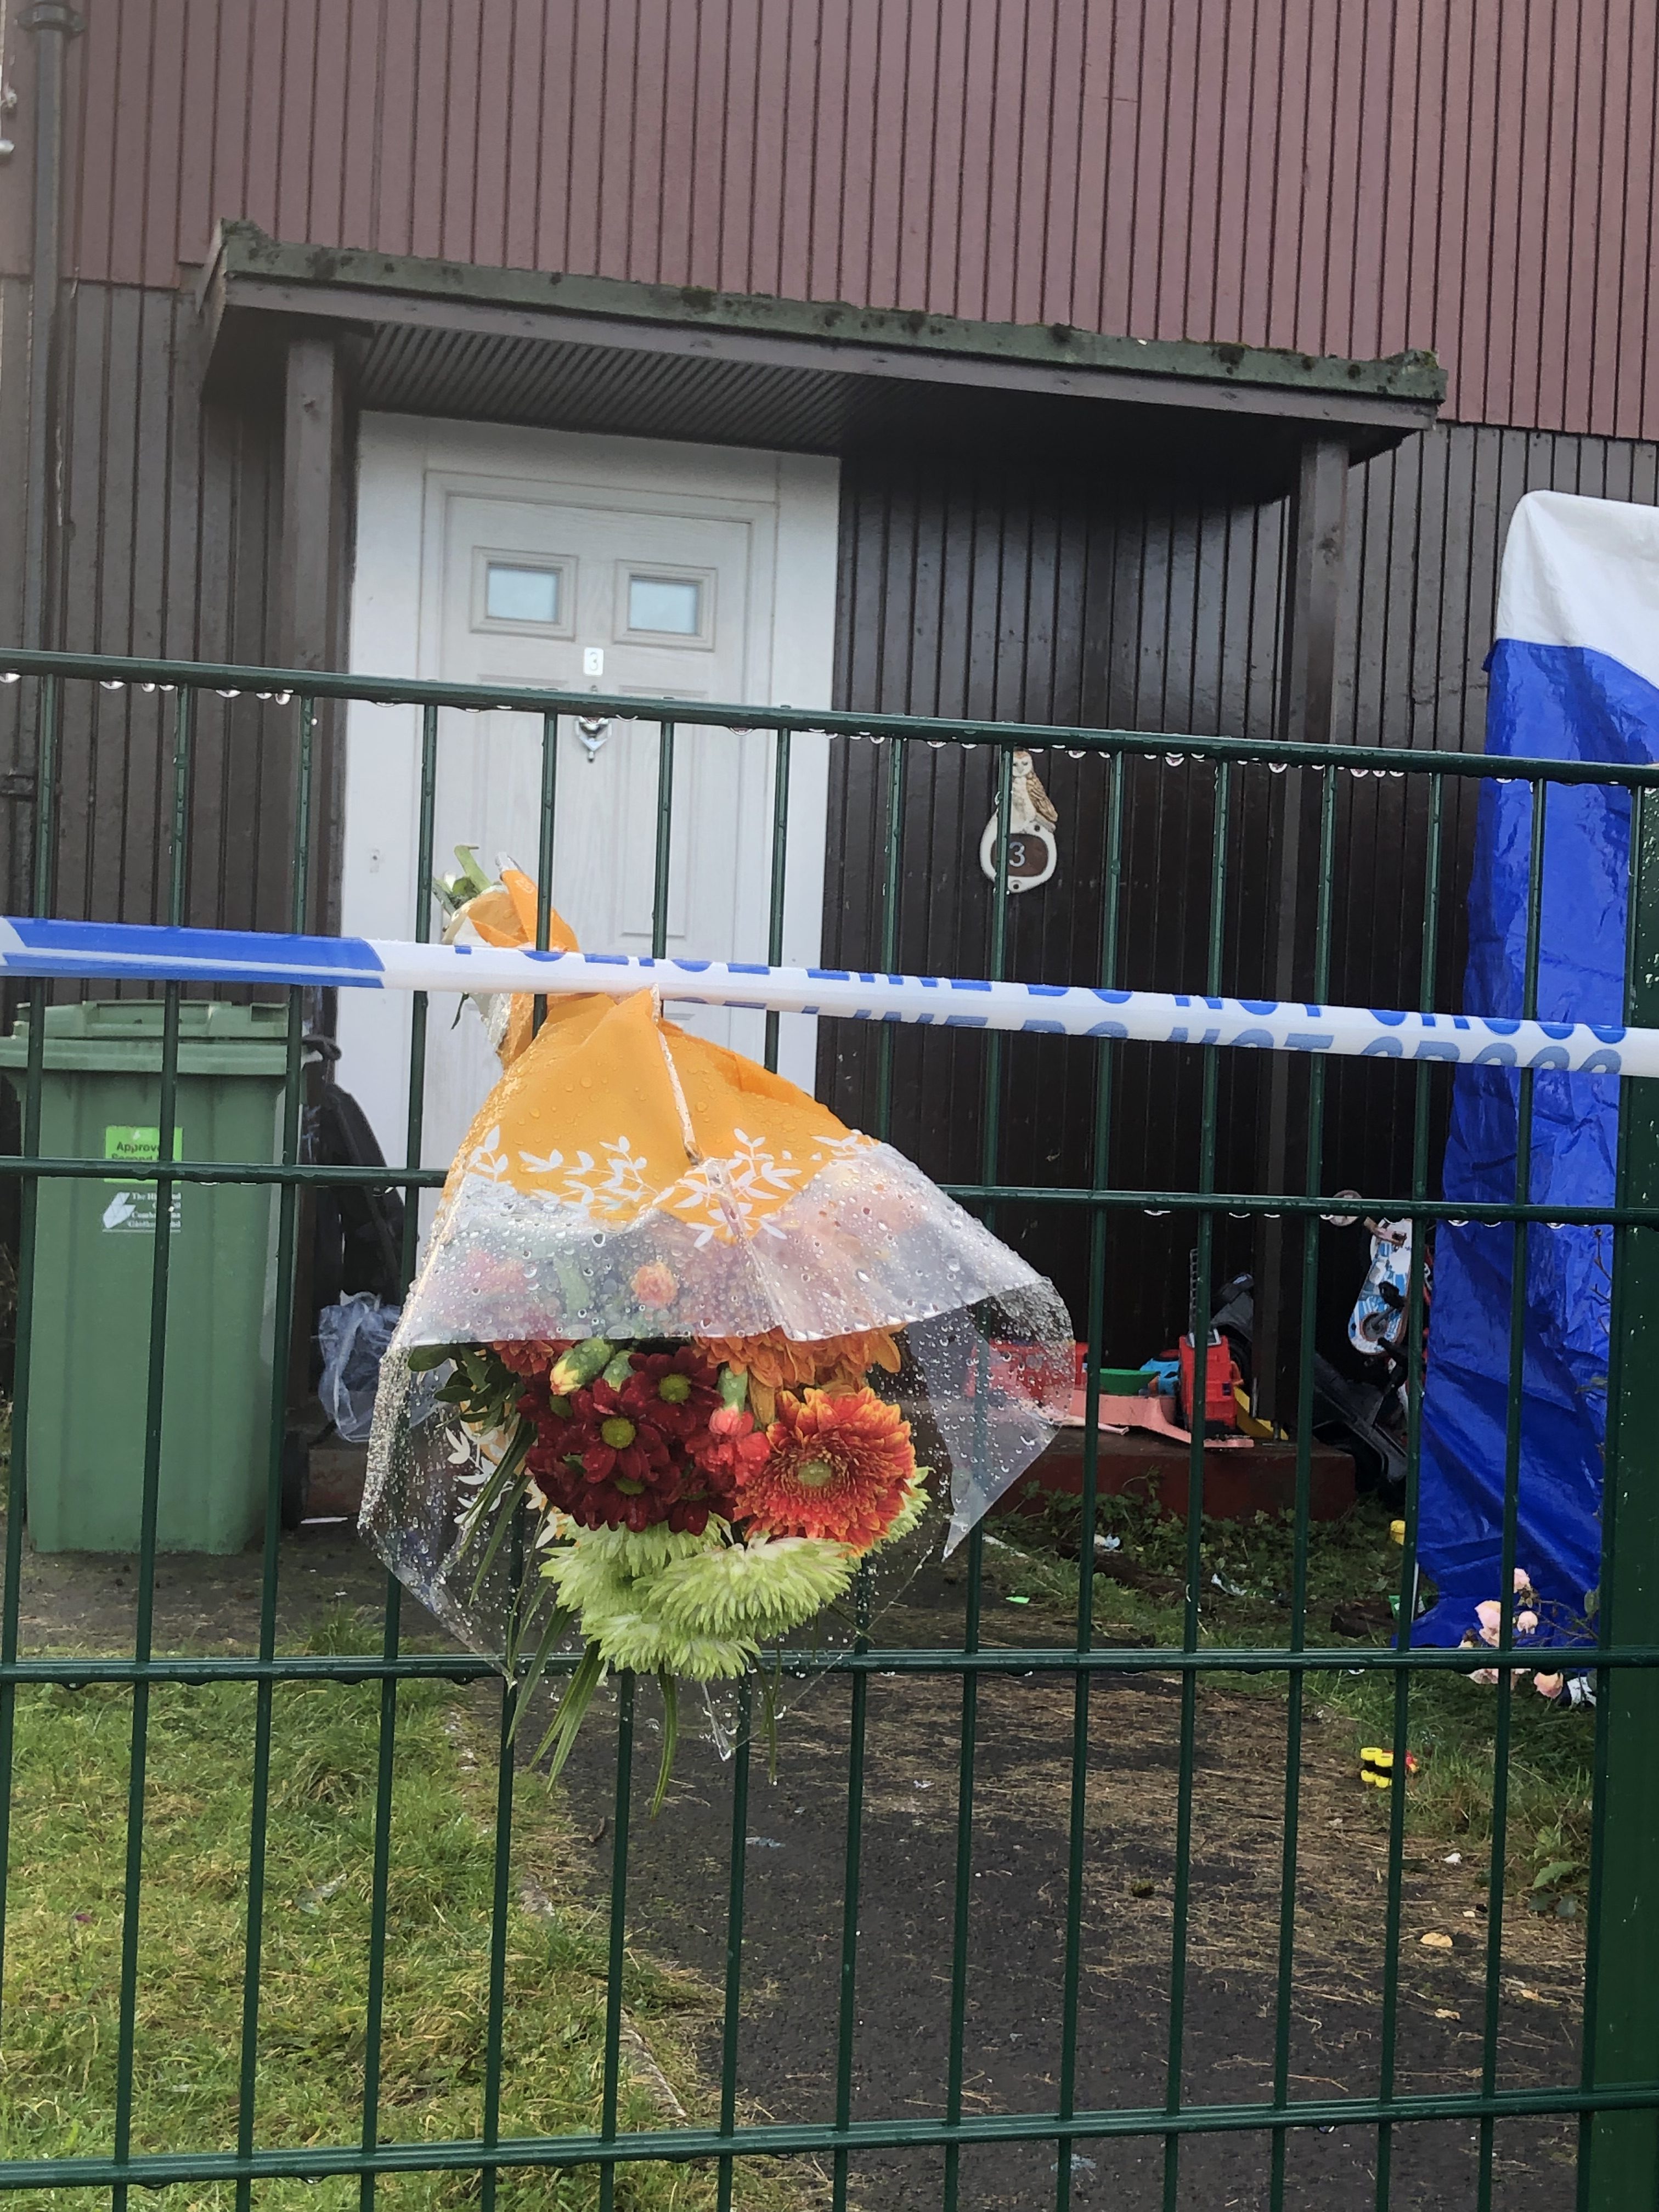 Floral tributes to the 'loving husband and doting father' have been left outside the home.